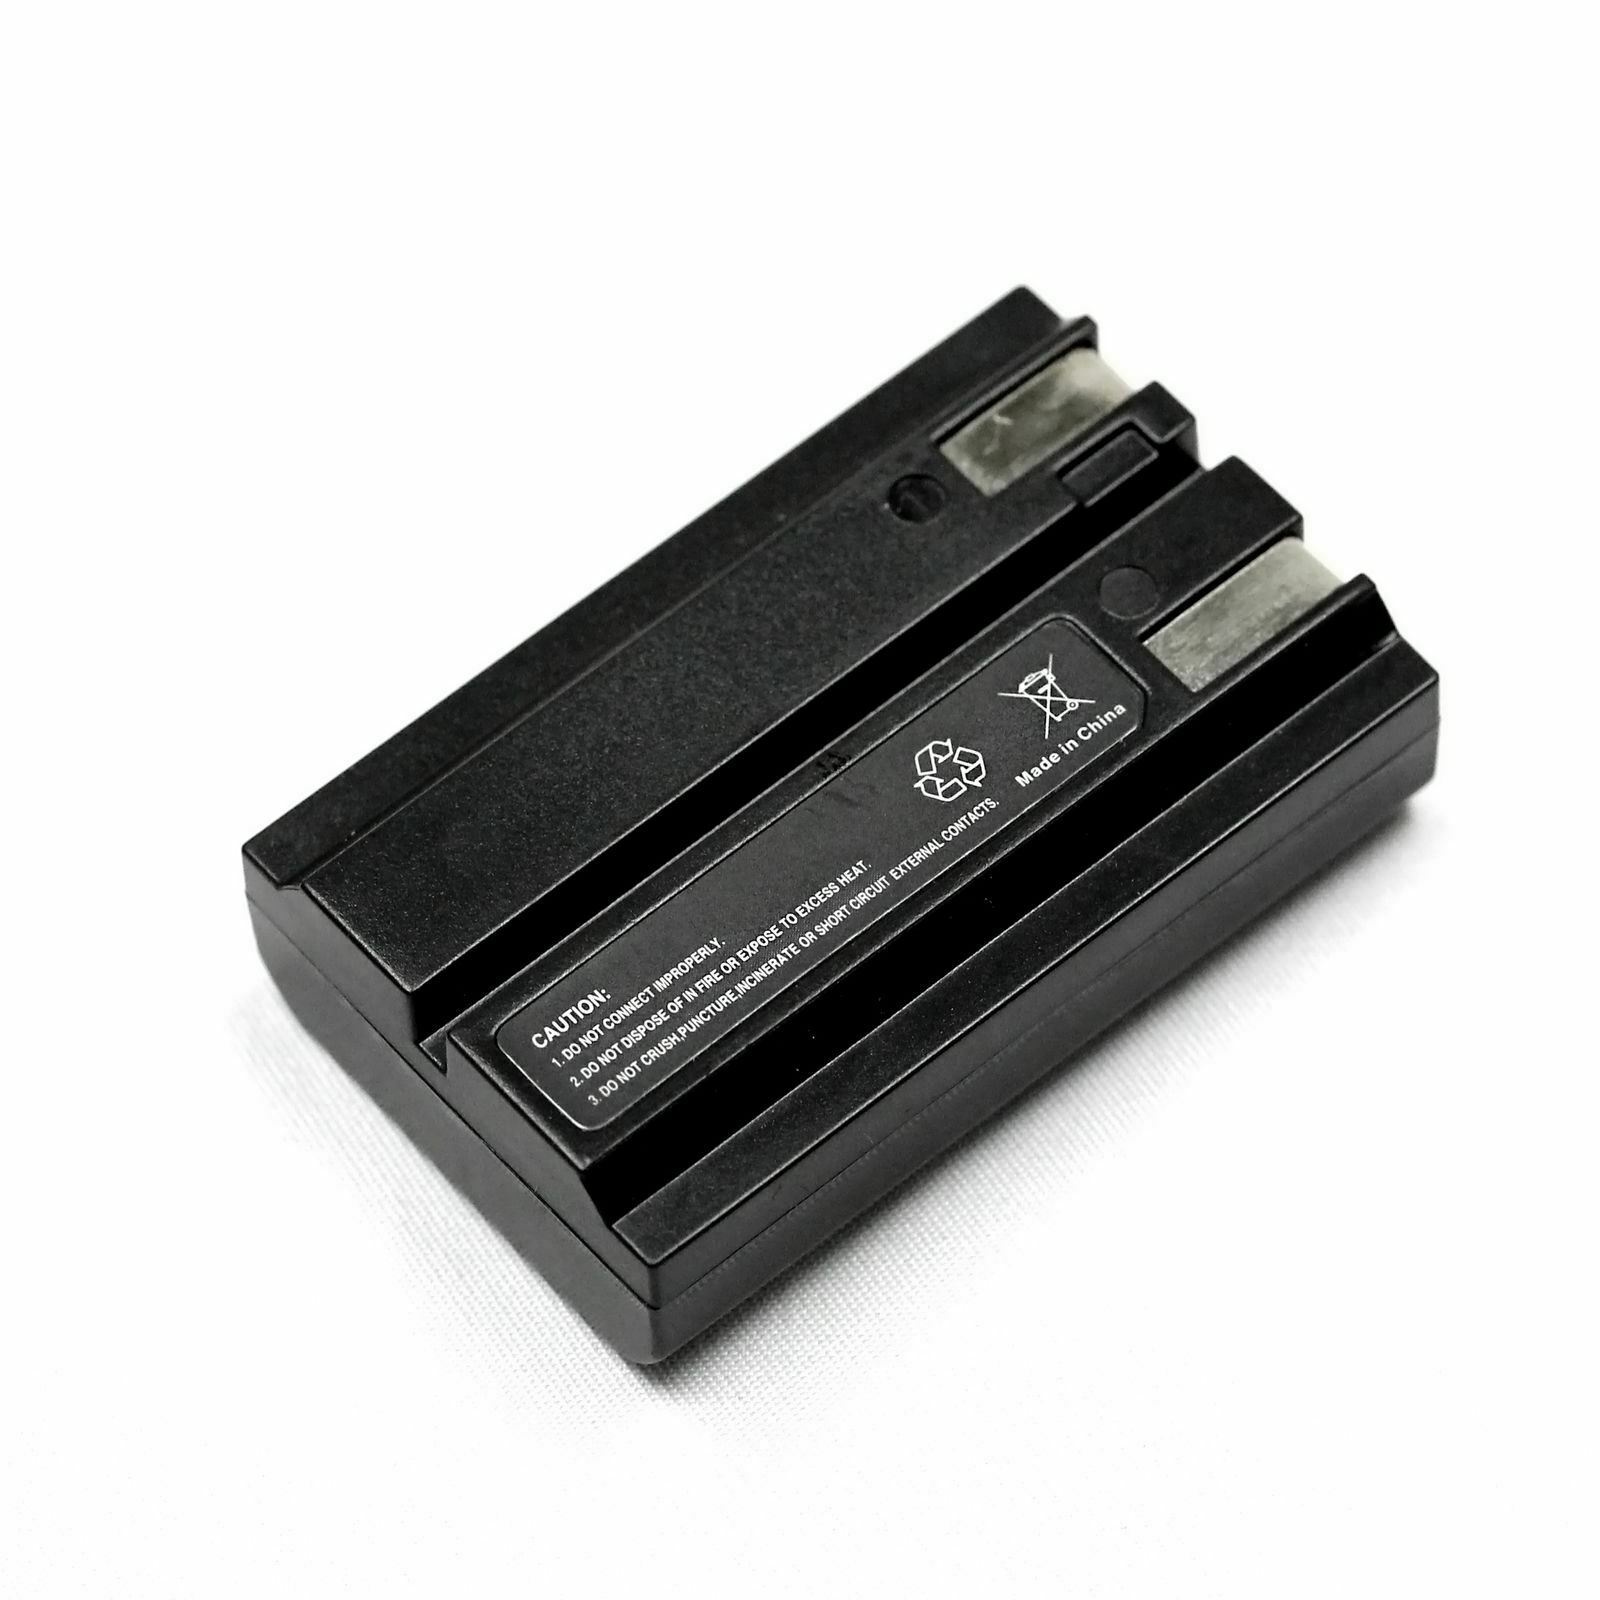 Canon COOLPIX 880 Camera Battery